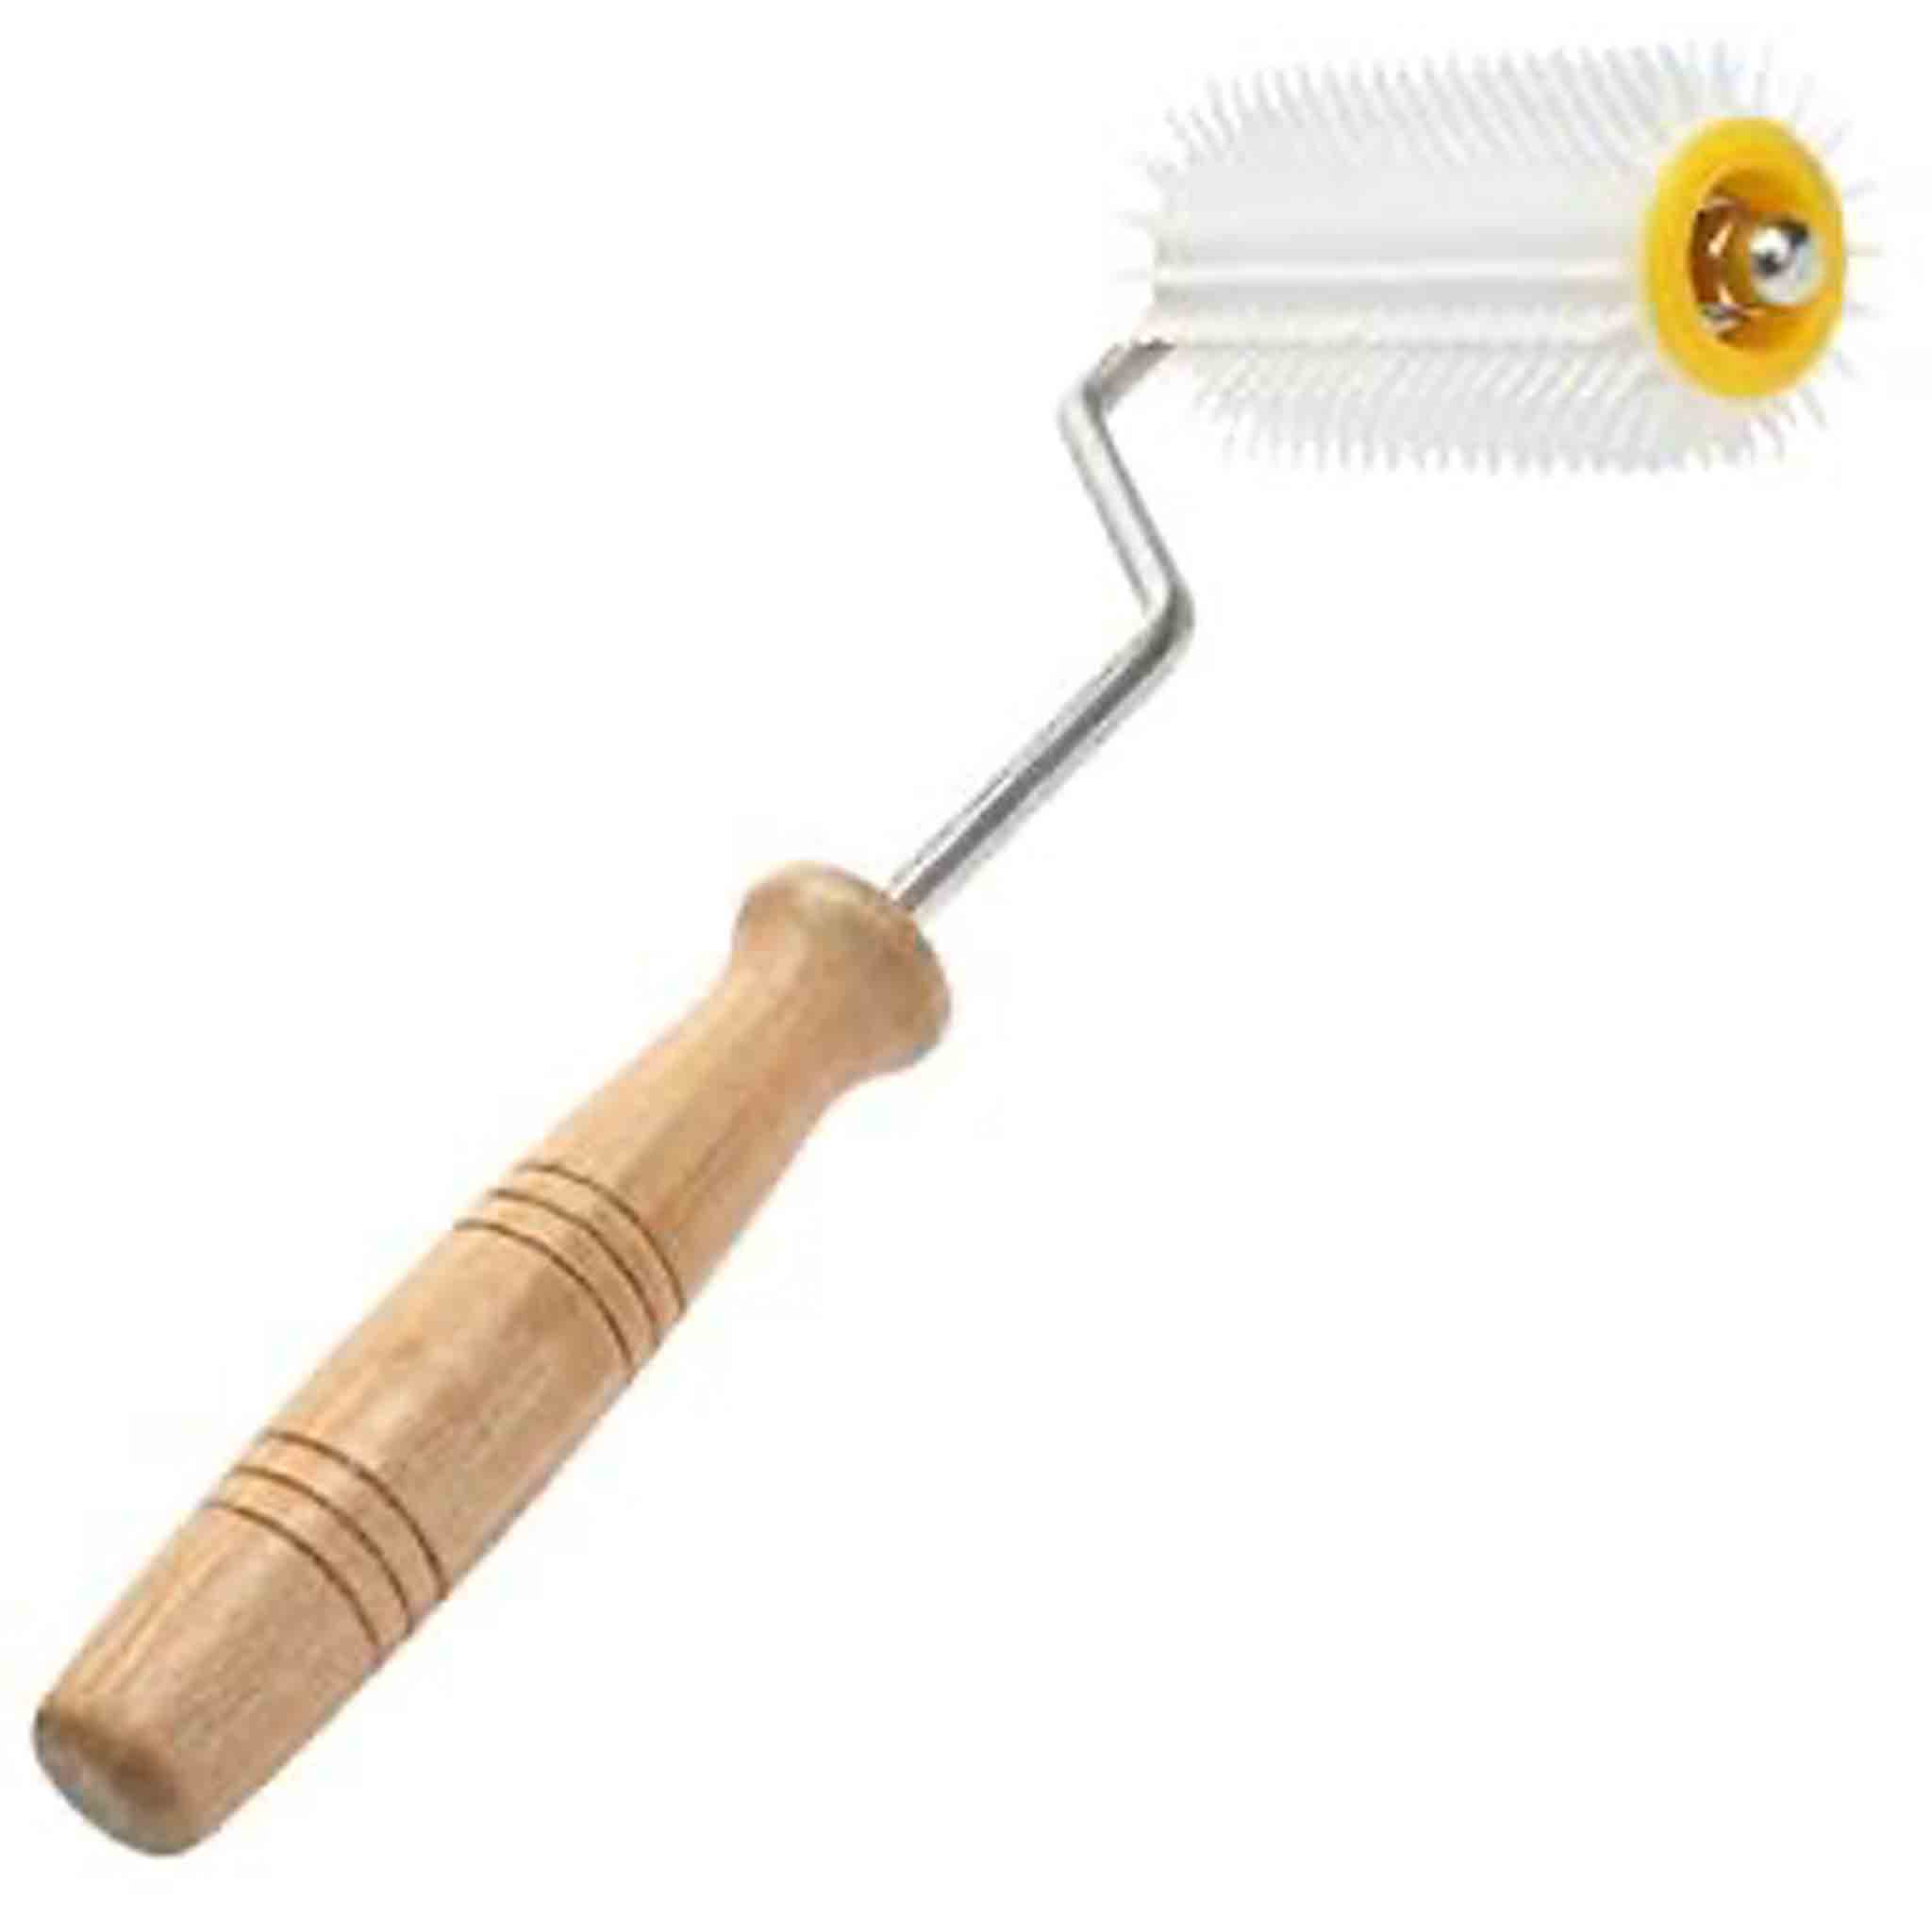 Beekeeping Honey Rotating Uncapping Scraper with Wooden Handle - Tools collection by Buzzbee Beekeeping Supplies